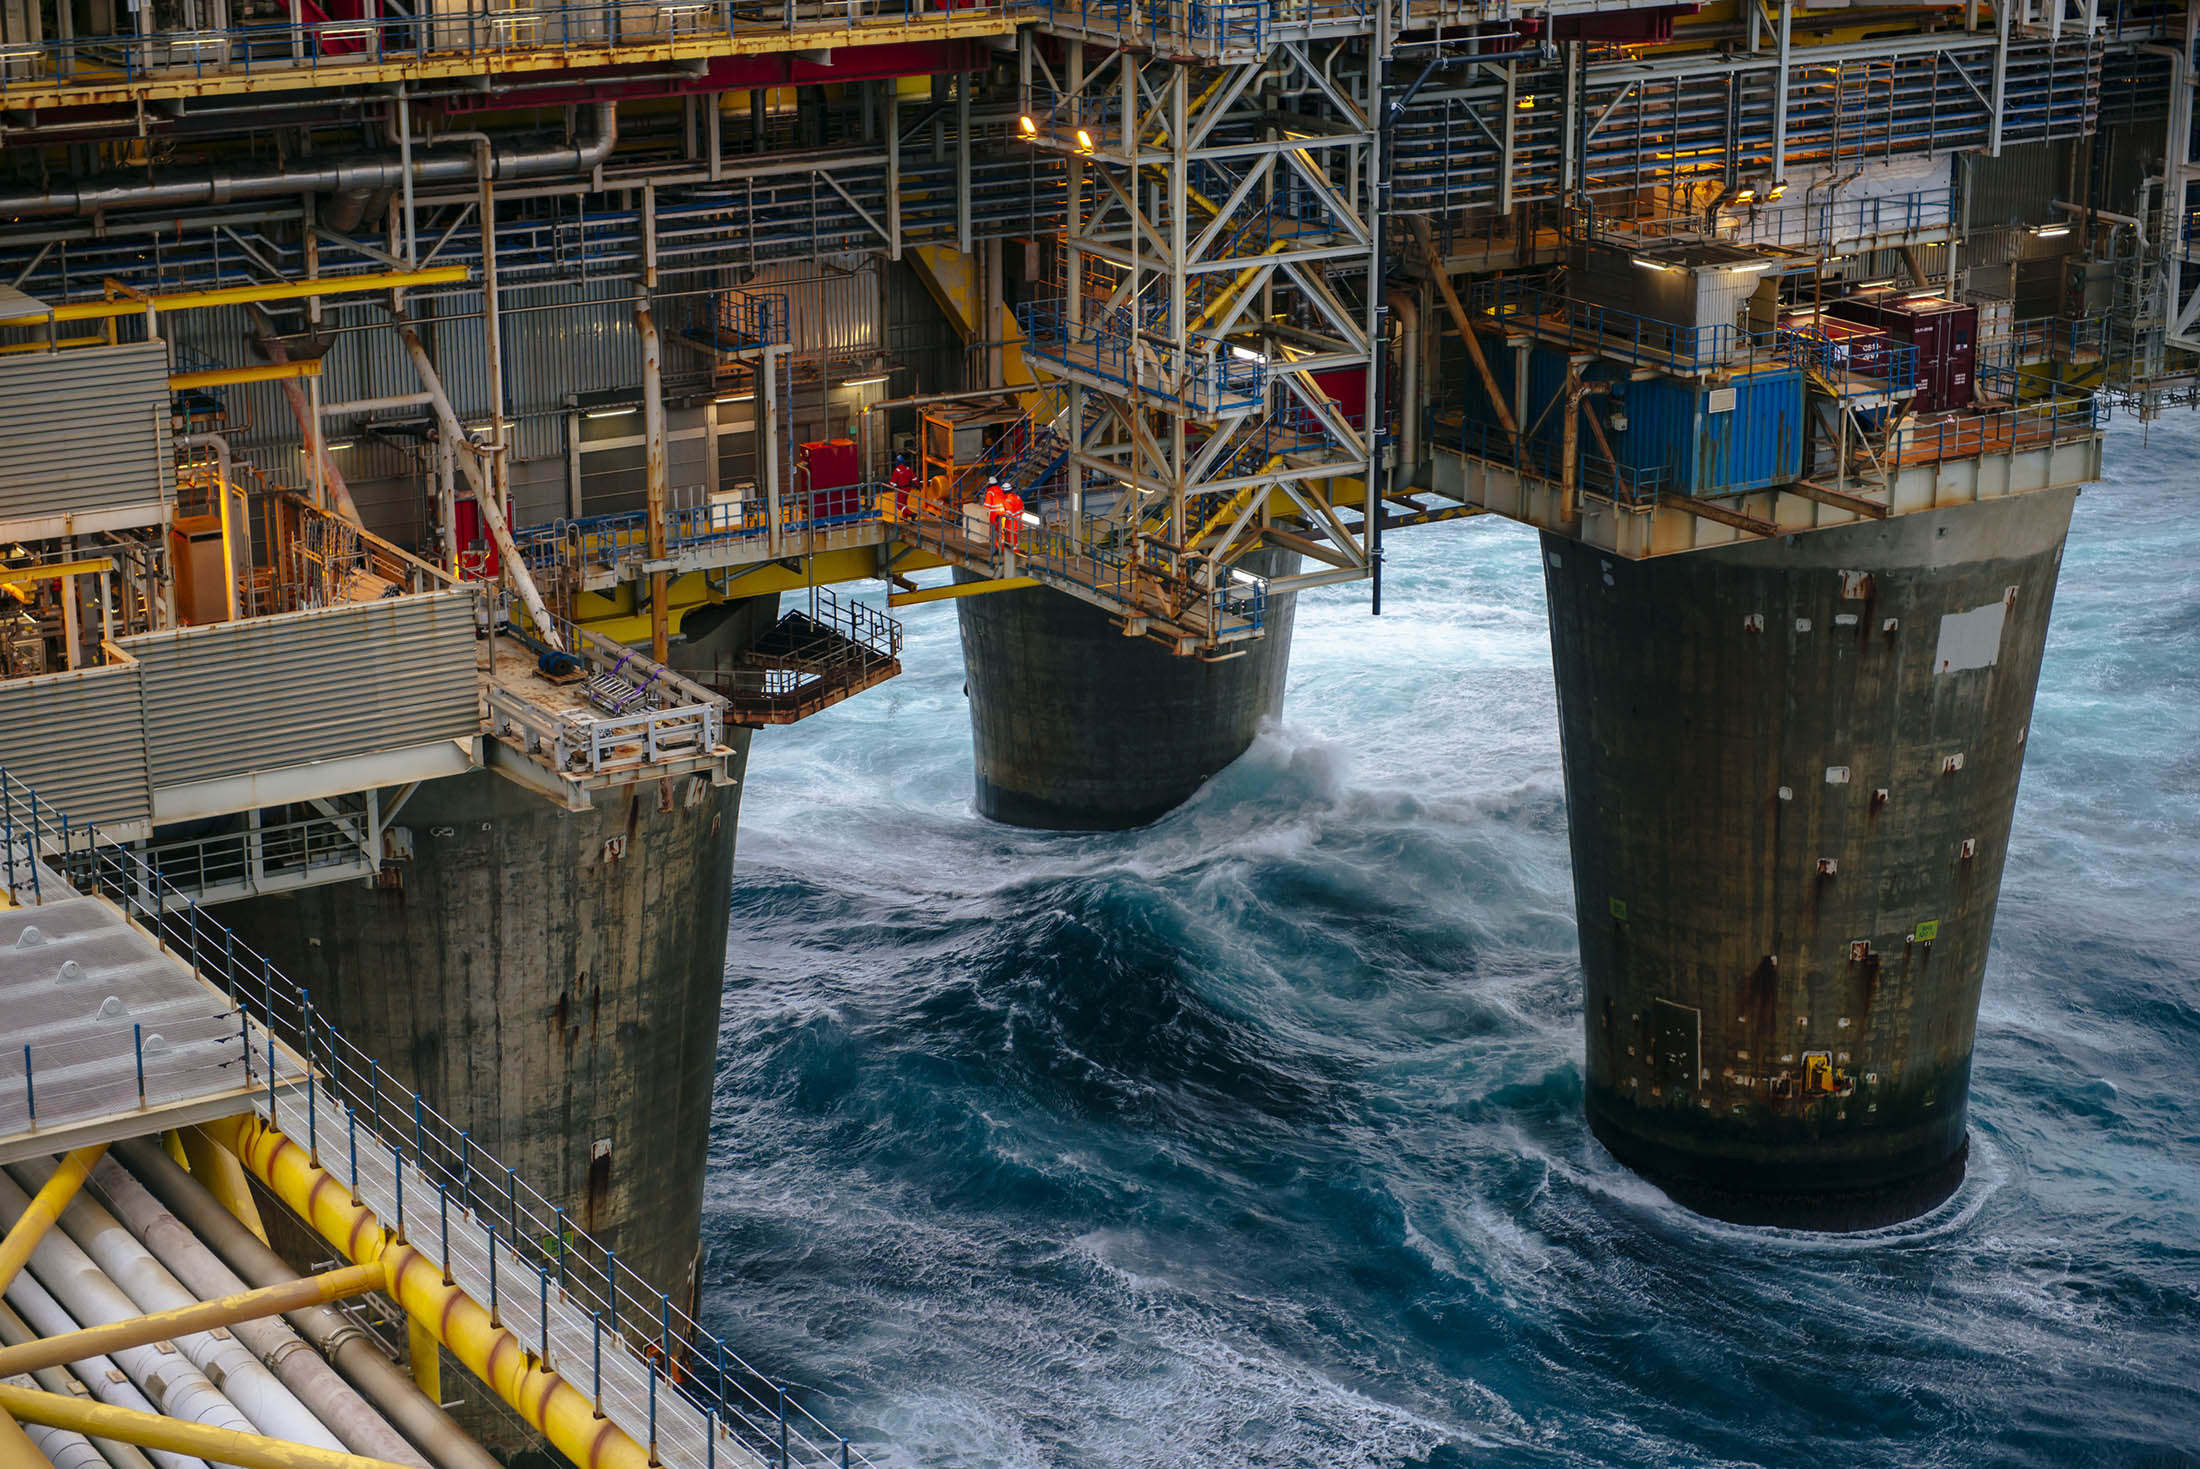 Workers move along an access way above the giant supporting legs of the Oseberg A offshore gas platform in the Oseberg North Sea oil field 140kms from Bergen, Norway.
